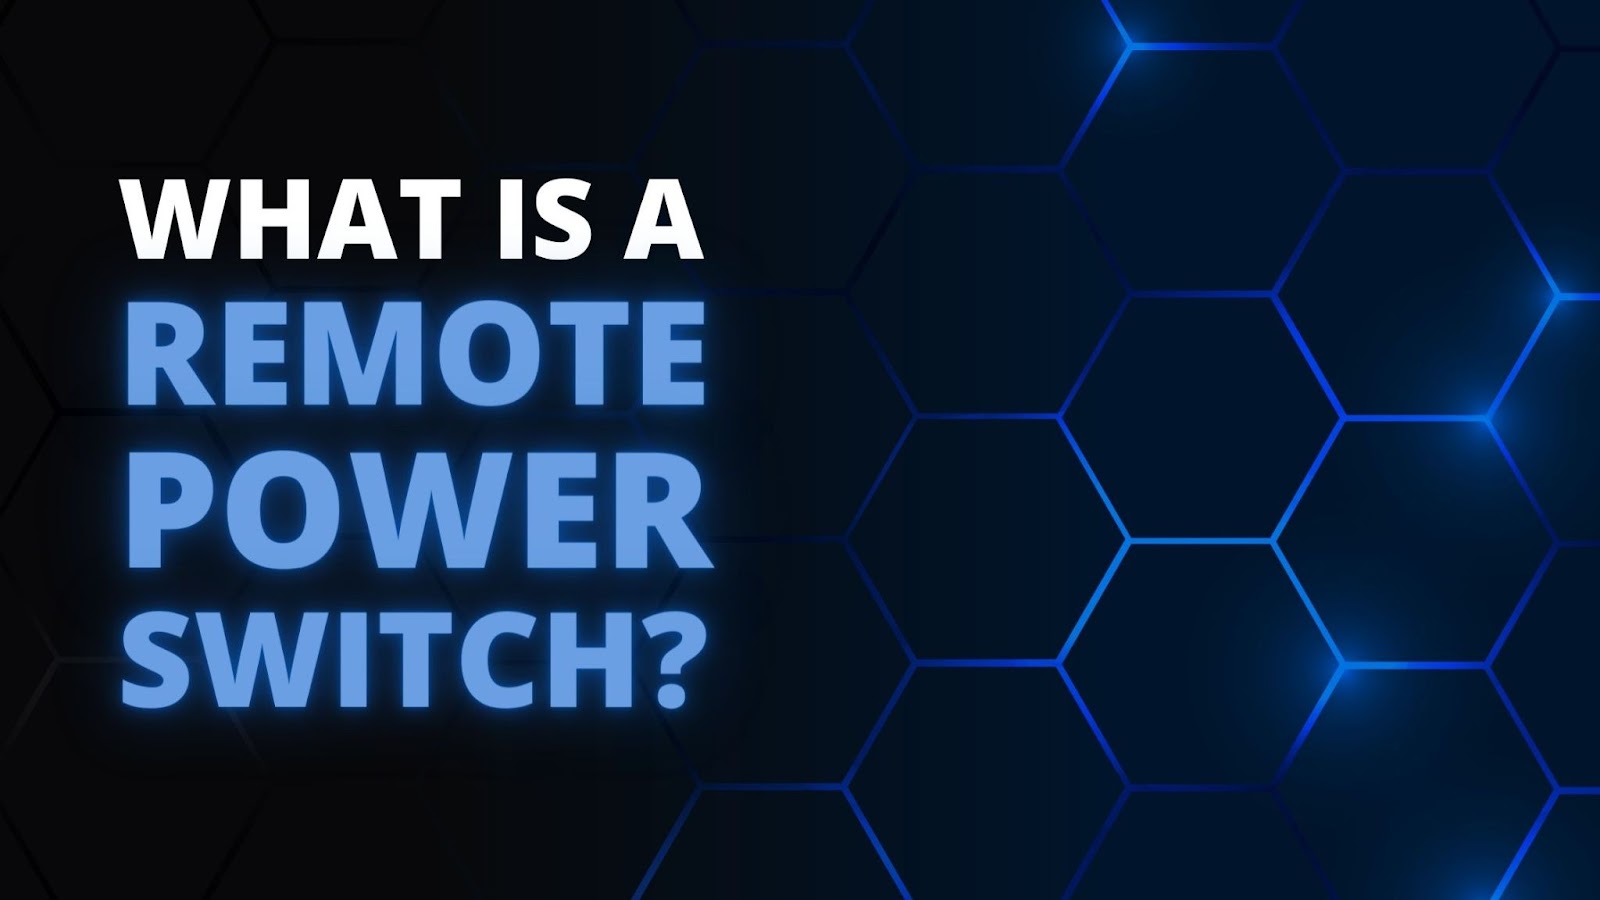 WHAT IS A REMOTE POWER SWITCH?